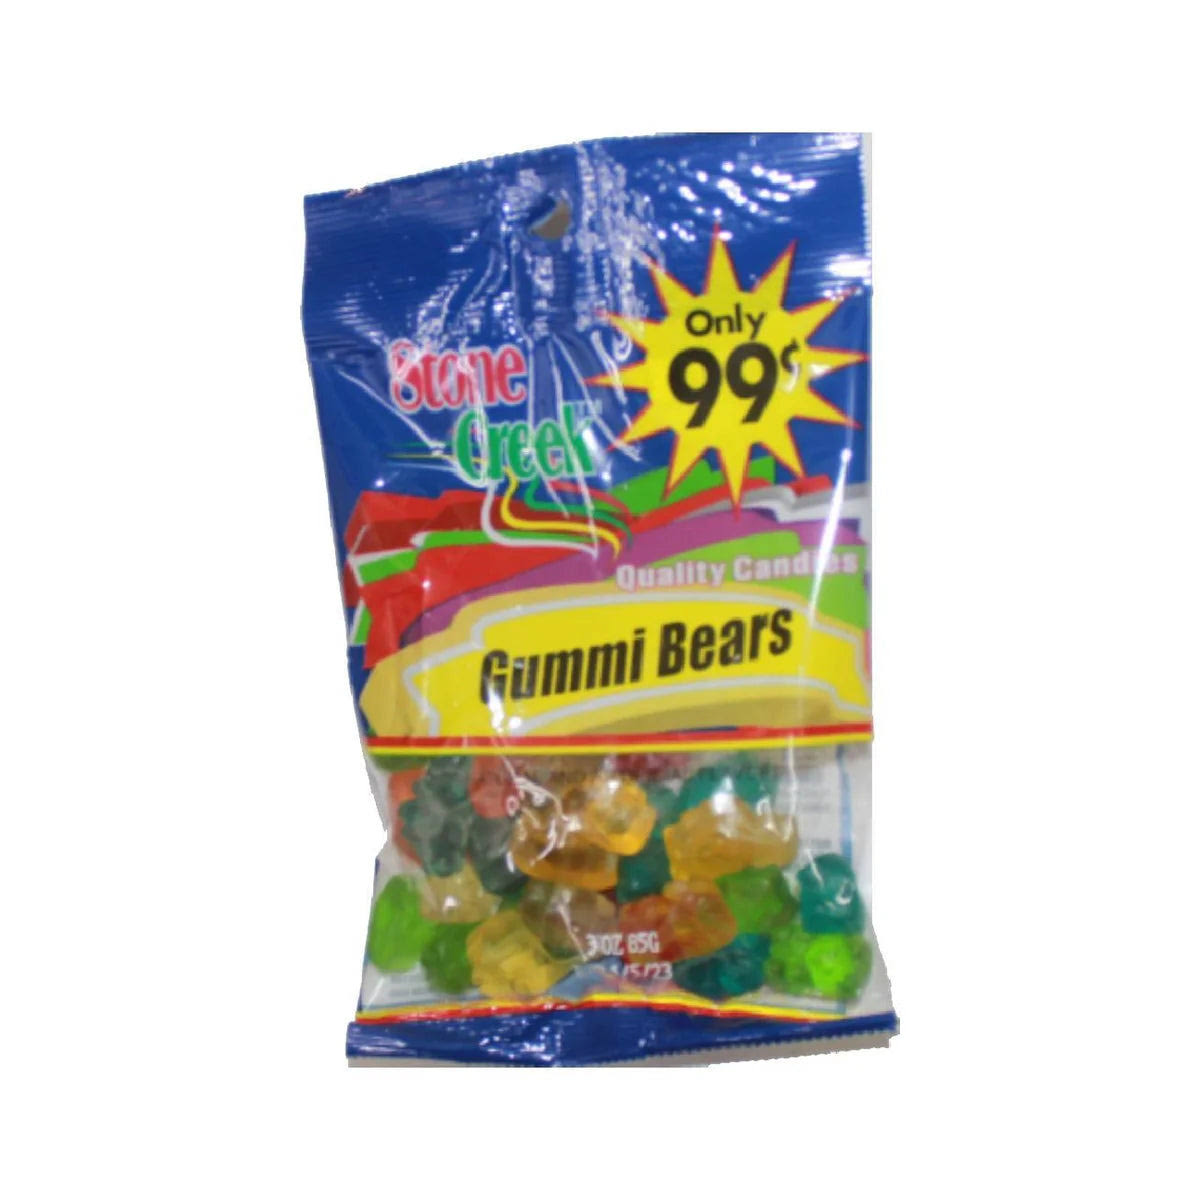 Stone Creek Gummy Bears - 3.75 Ounces - Food Universe Marketplace - Delivered by Mercato